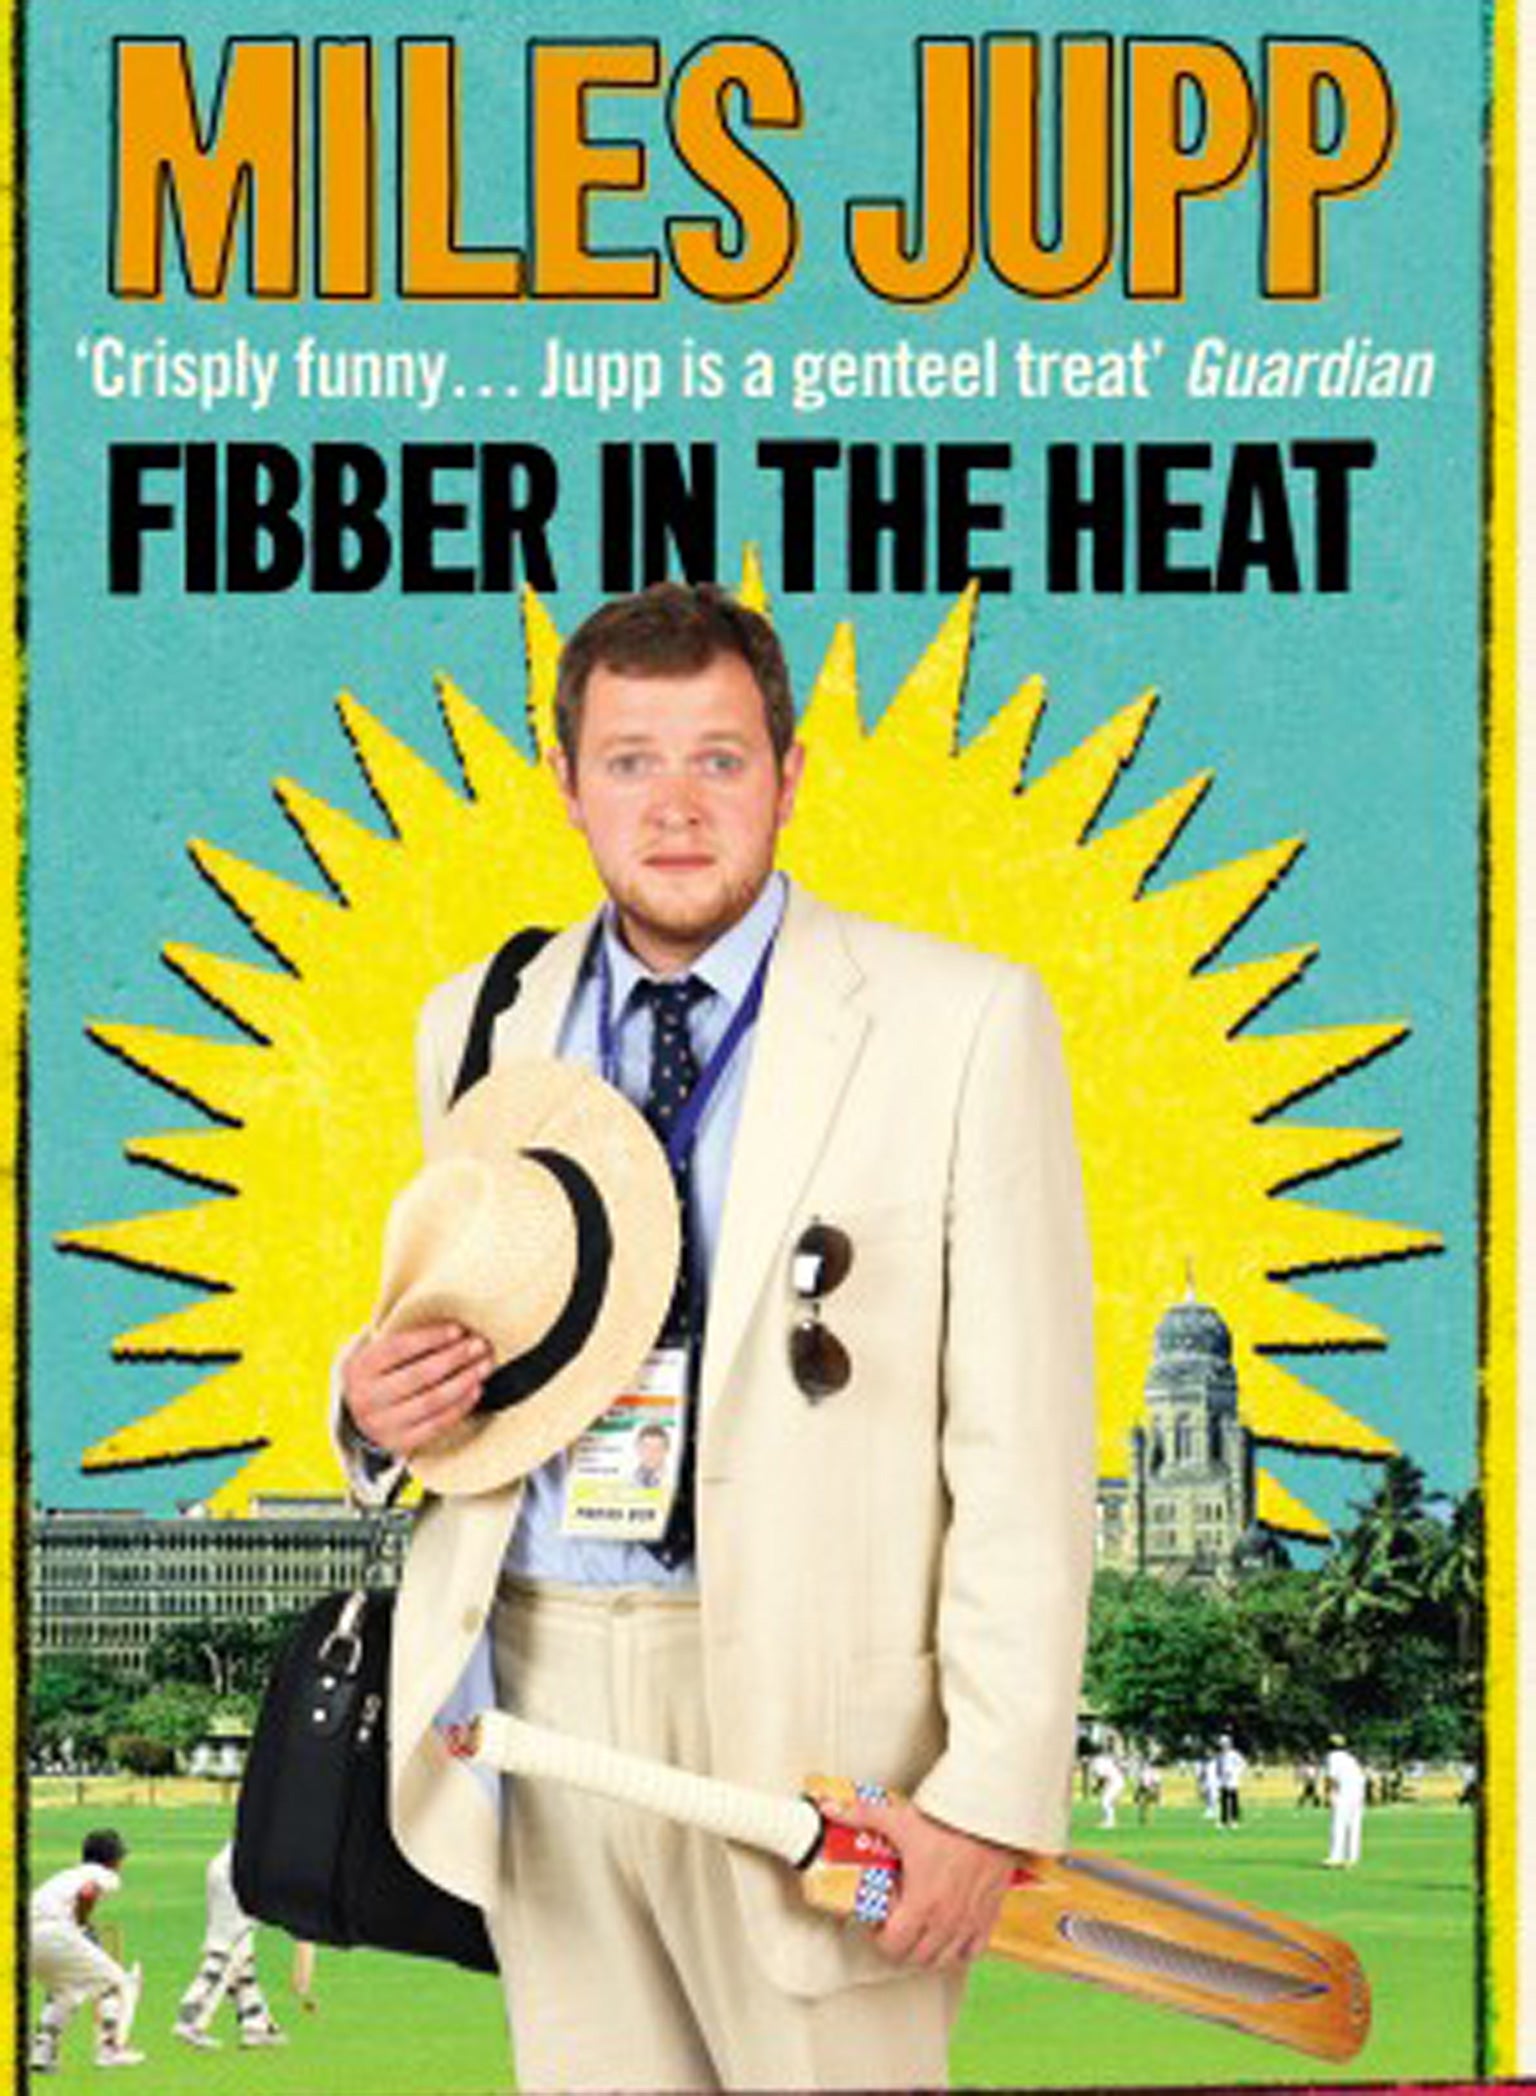 Fibber in the Heat, by Miles Jupp